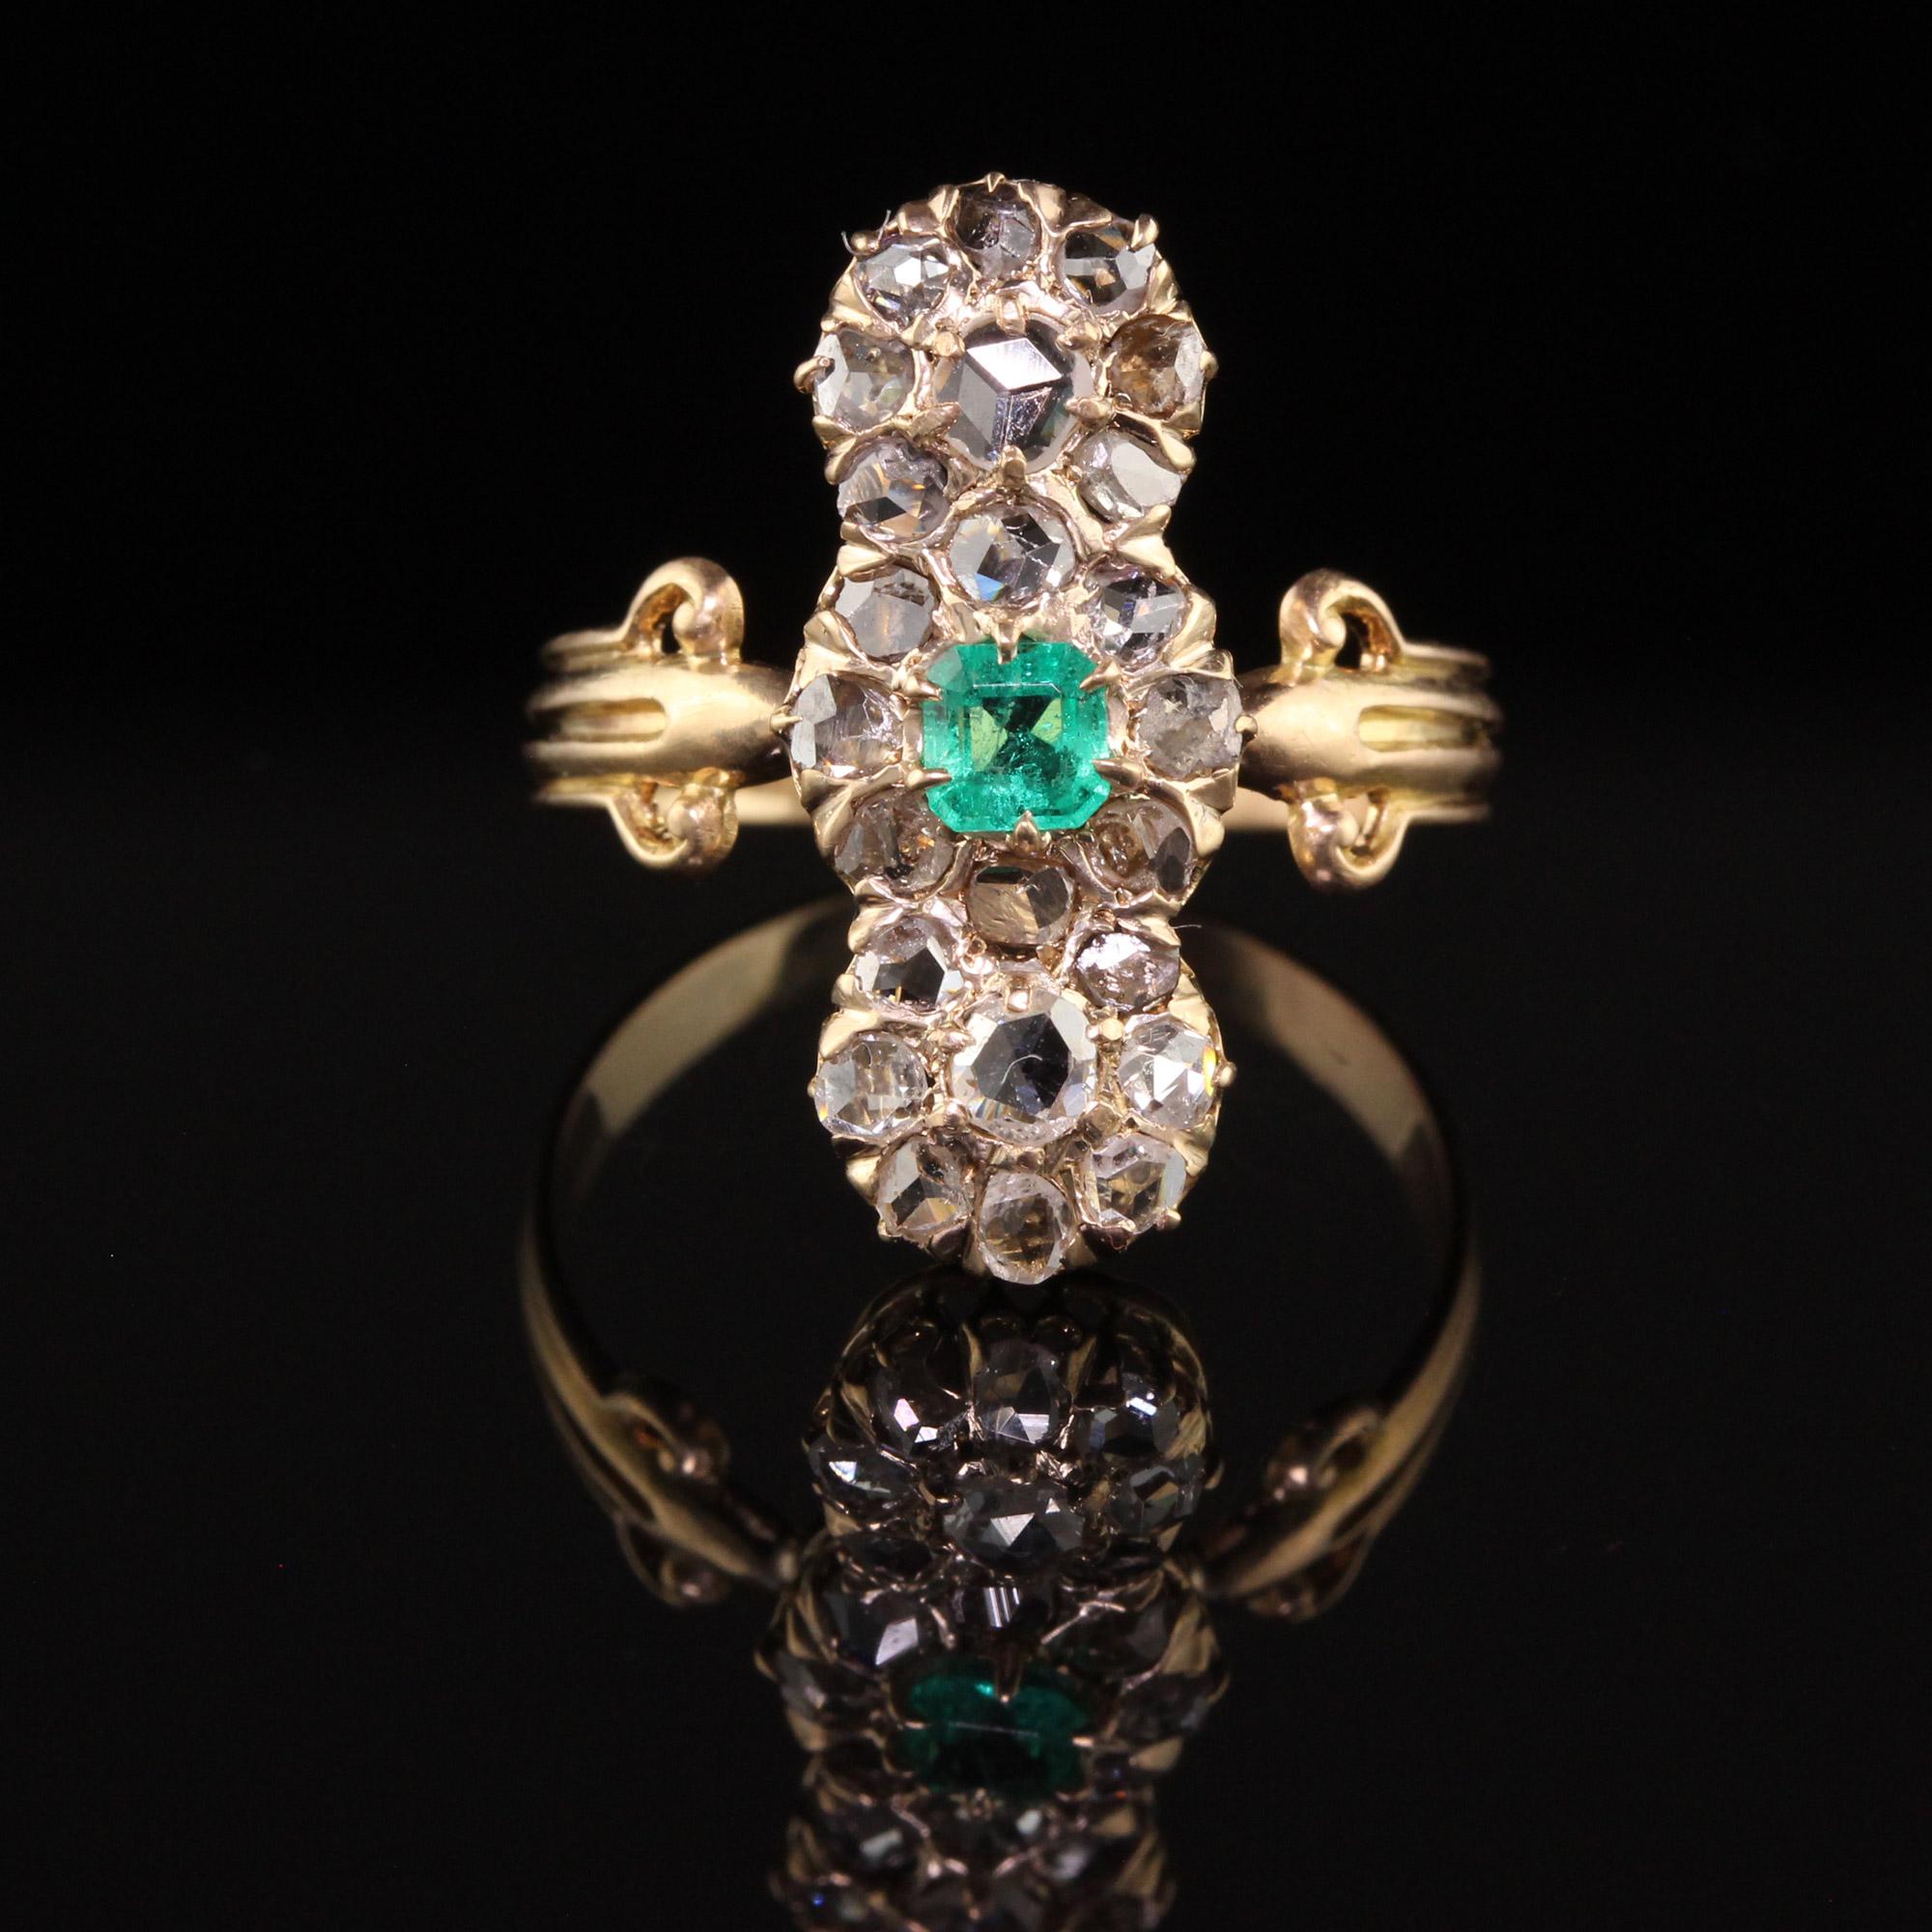 Beautiful Antique Victorian 18K Yellow Gold Rose Cut Diamond and Emerald Shield Ring. This gorgeous shield ring is crafted in 18k yellow gold. The ring has white rose cut diamonds set all over the top of the ring with a natural Colombian emerald in